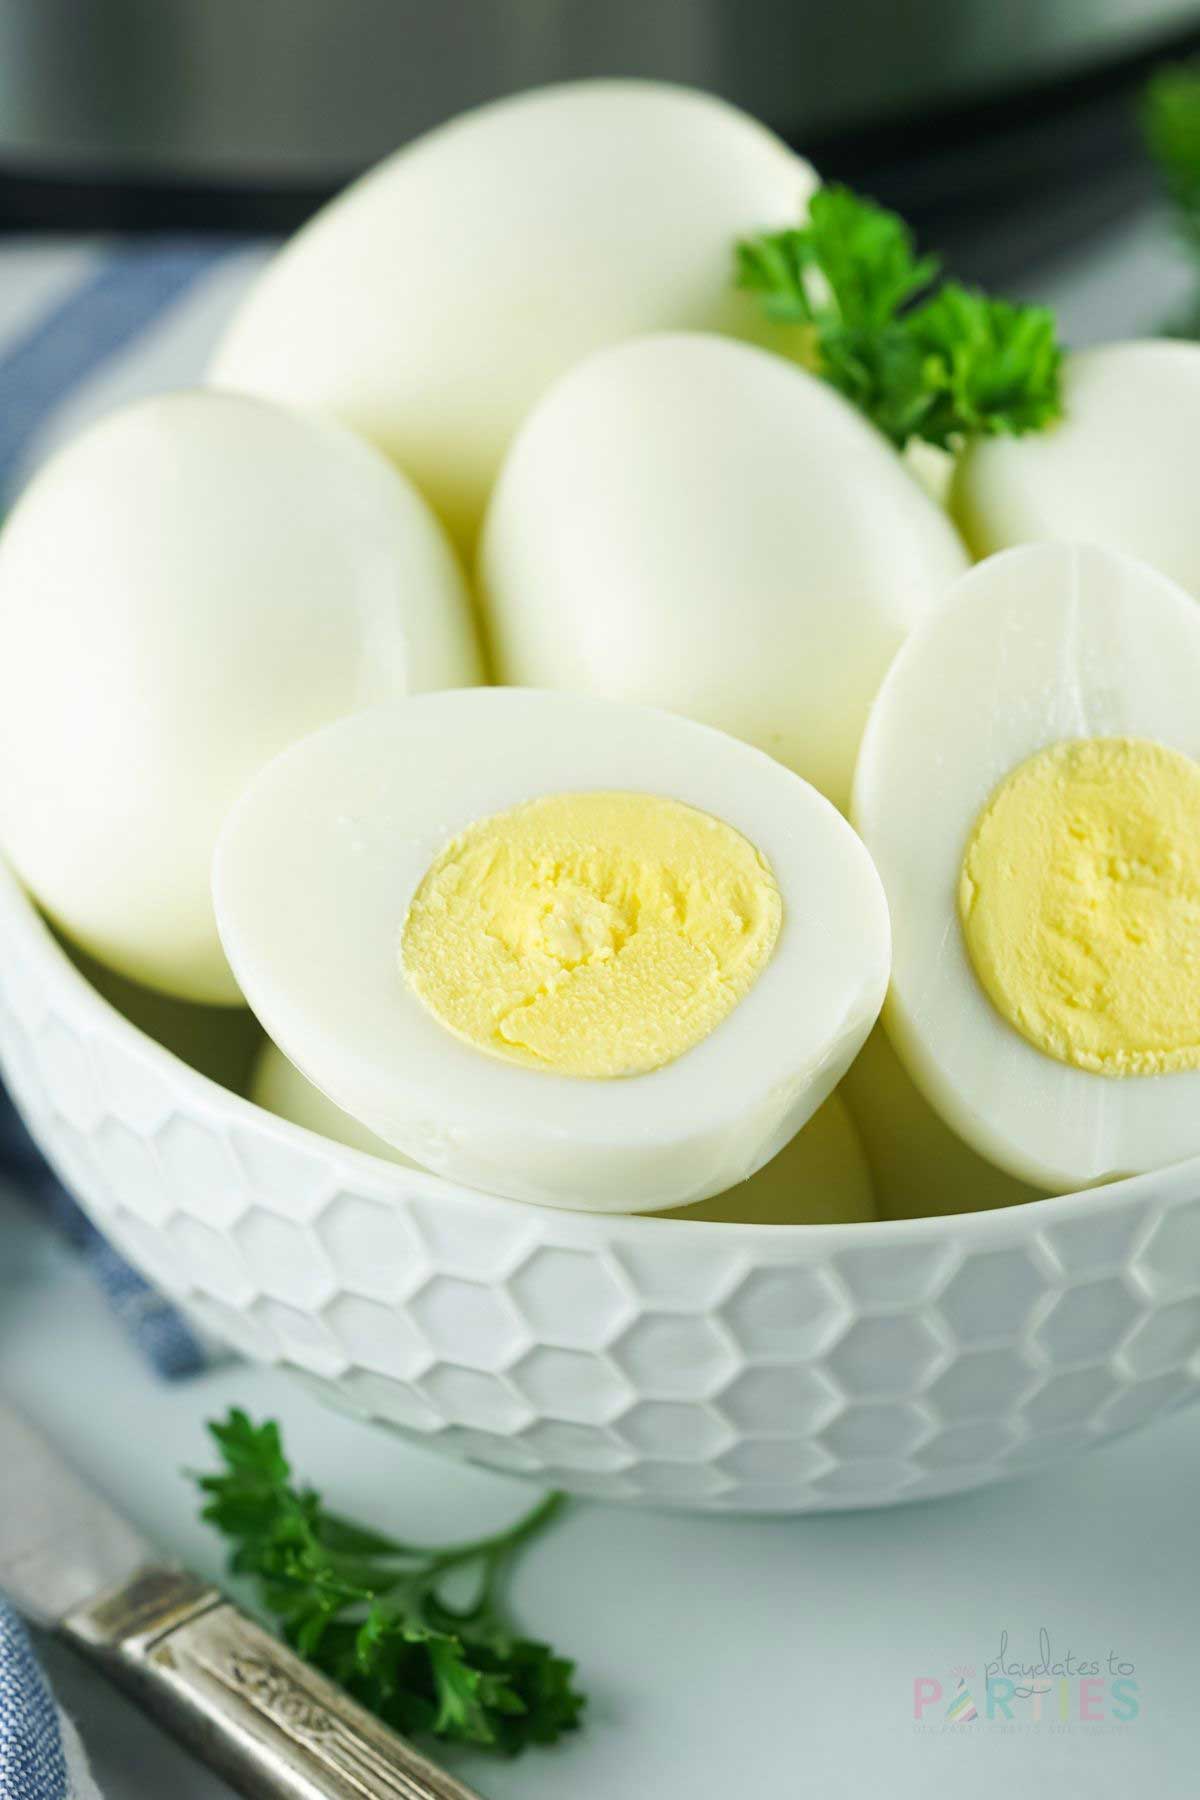 Hard boiled eggs in a white bowl, with one egg cut in half to show the yolk.